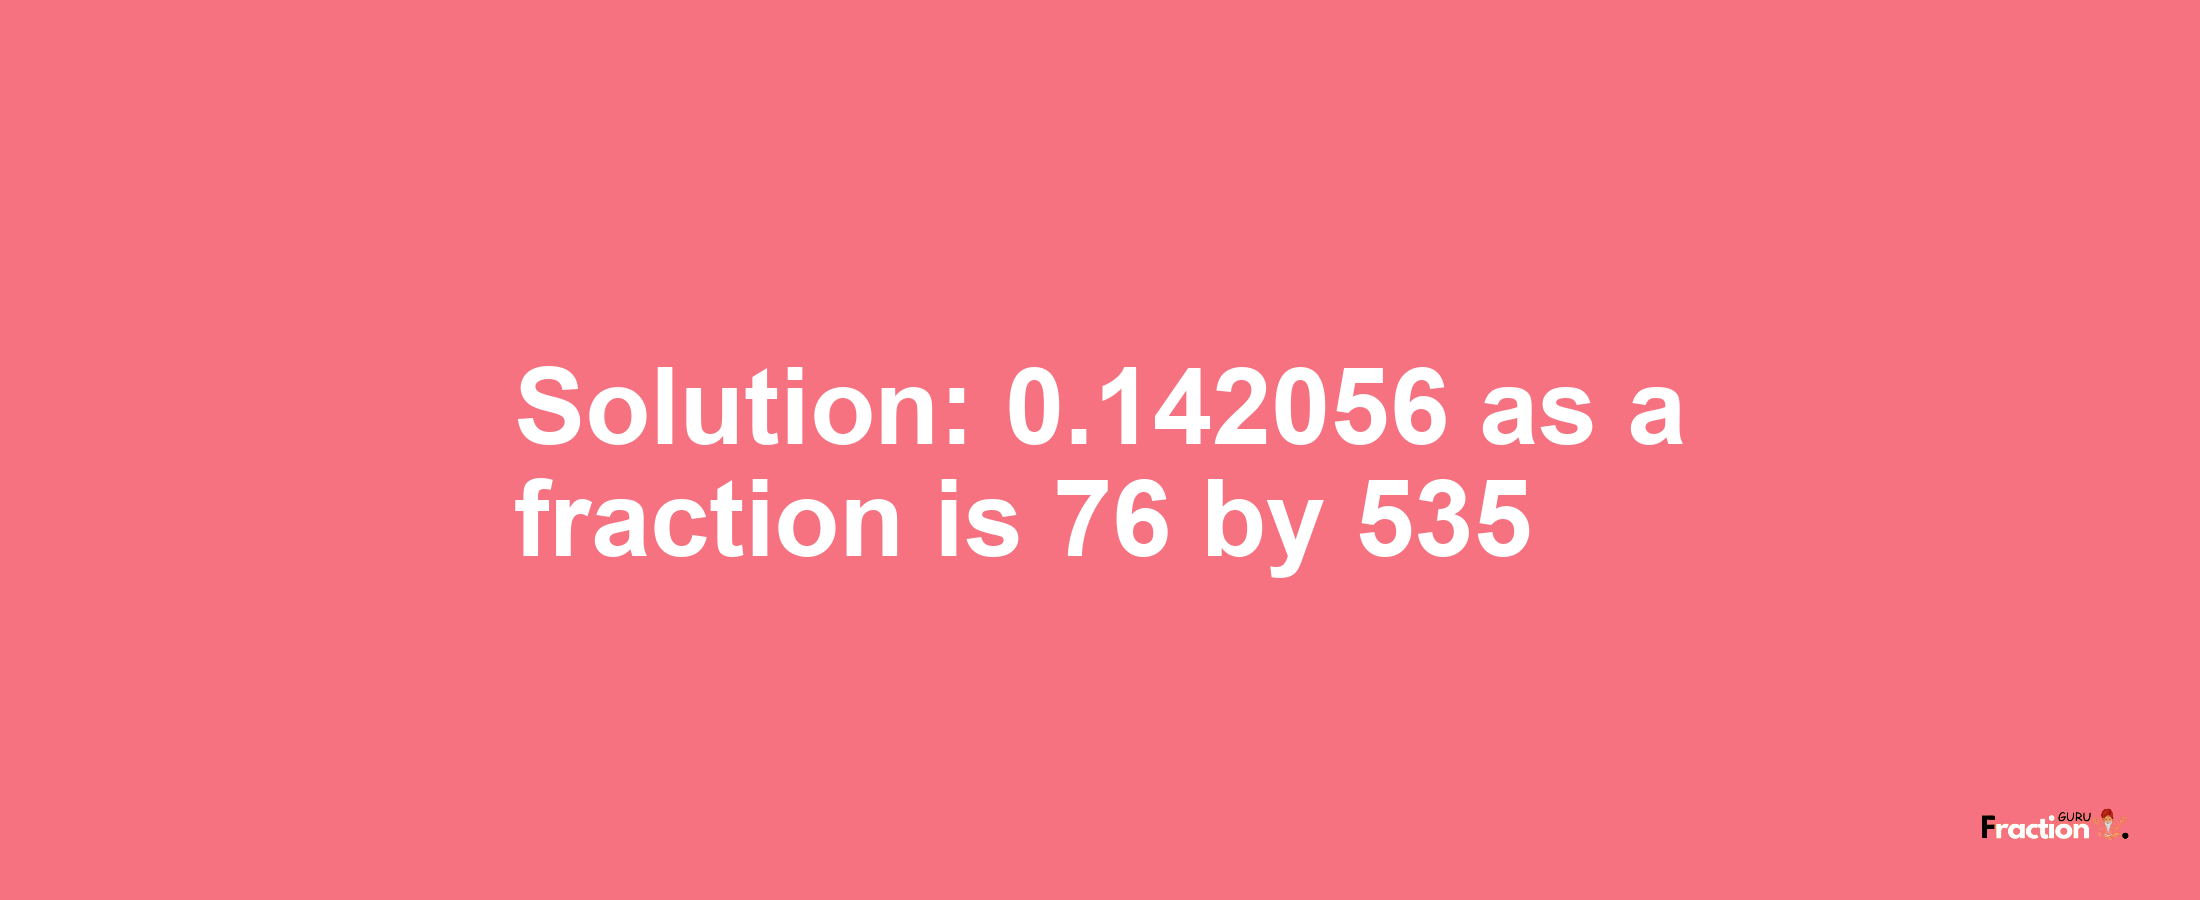 Solution:0.142056 as a fraction is 76/535